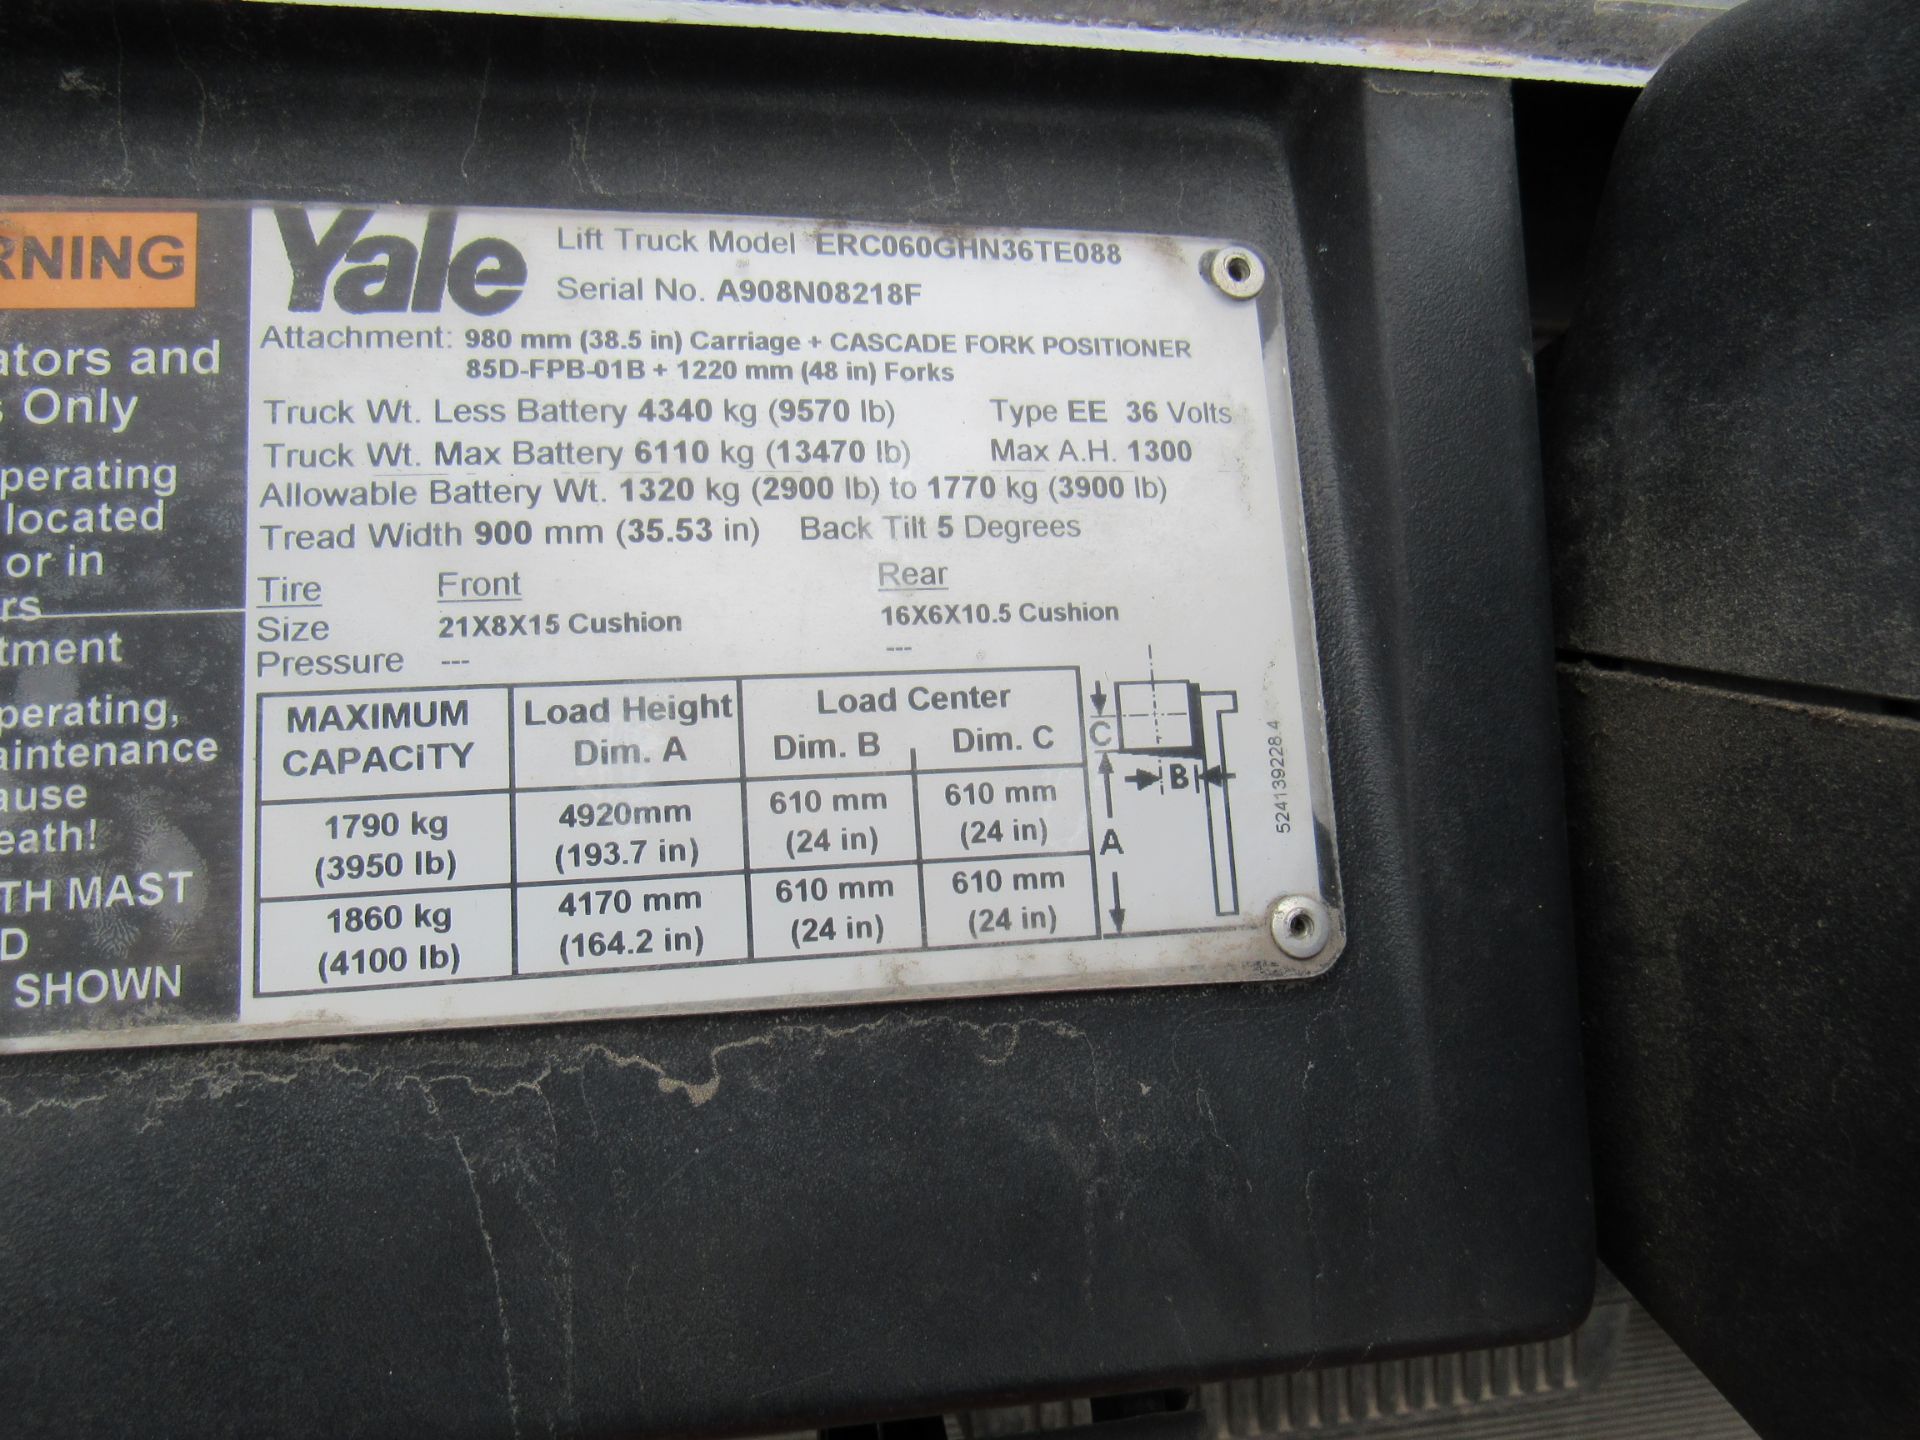 Yale Forklift, Model #ERC060GHN36TE088, S/N #A908N08218F, Truck Weight W/ Max Battery = 13470 Lb - Image 4 of 8